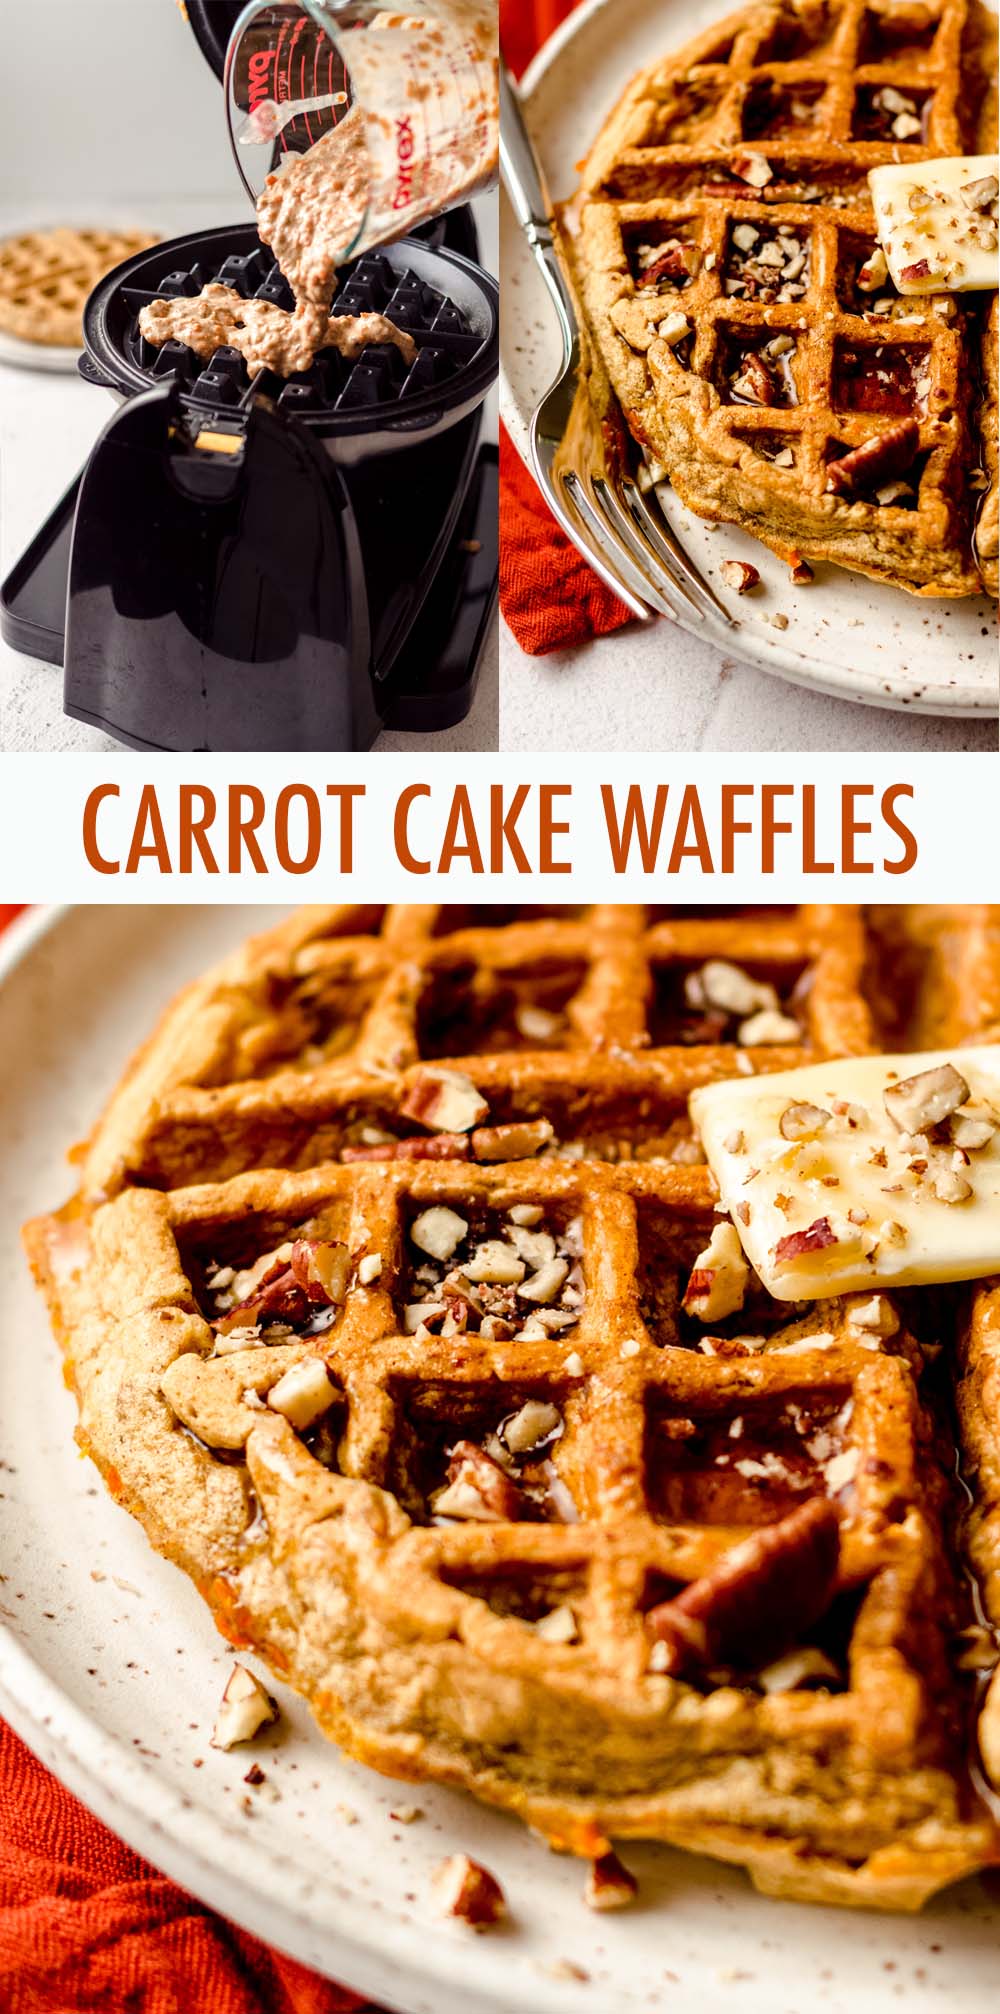 Soft and fluffy homemade carrot cake waffles filled with shredded carrots, warm spices, and crunchy nuts. A non-traditional way to get your waffle fix with a lighter take on the ingredient list. via @frshaprilflours